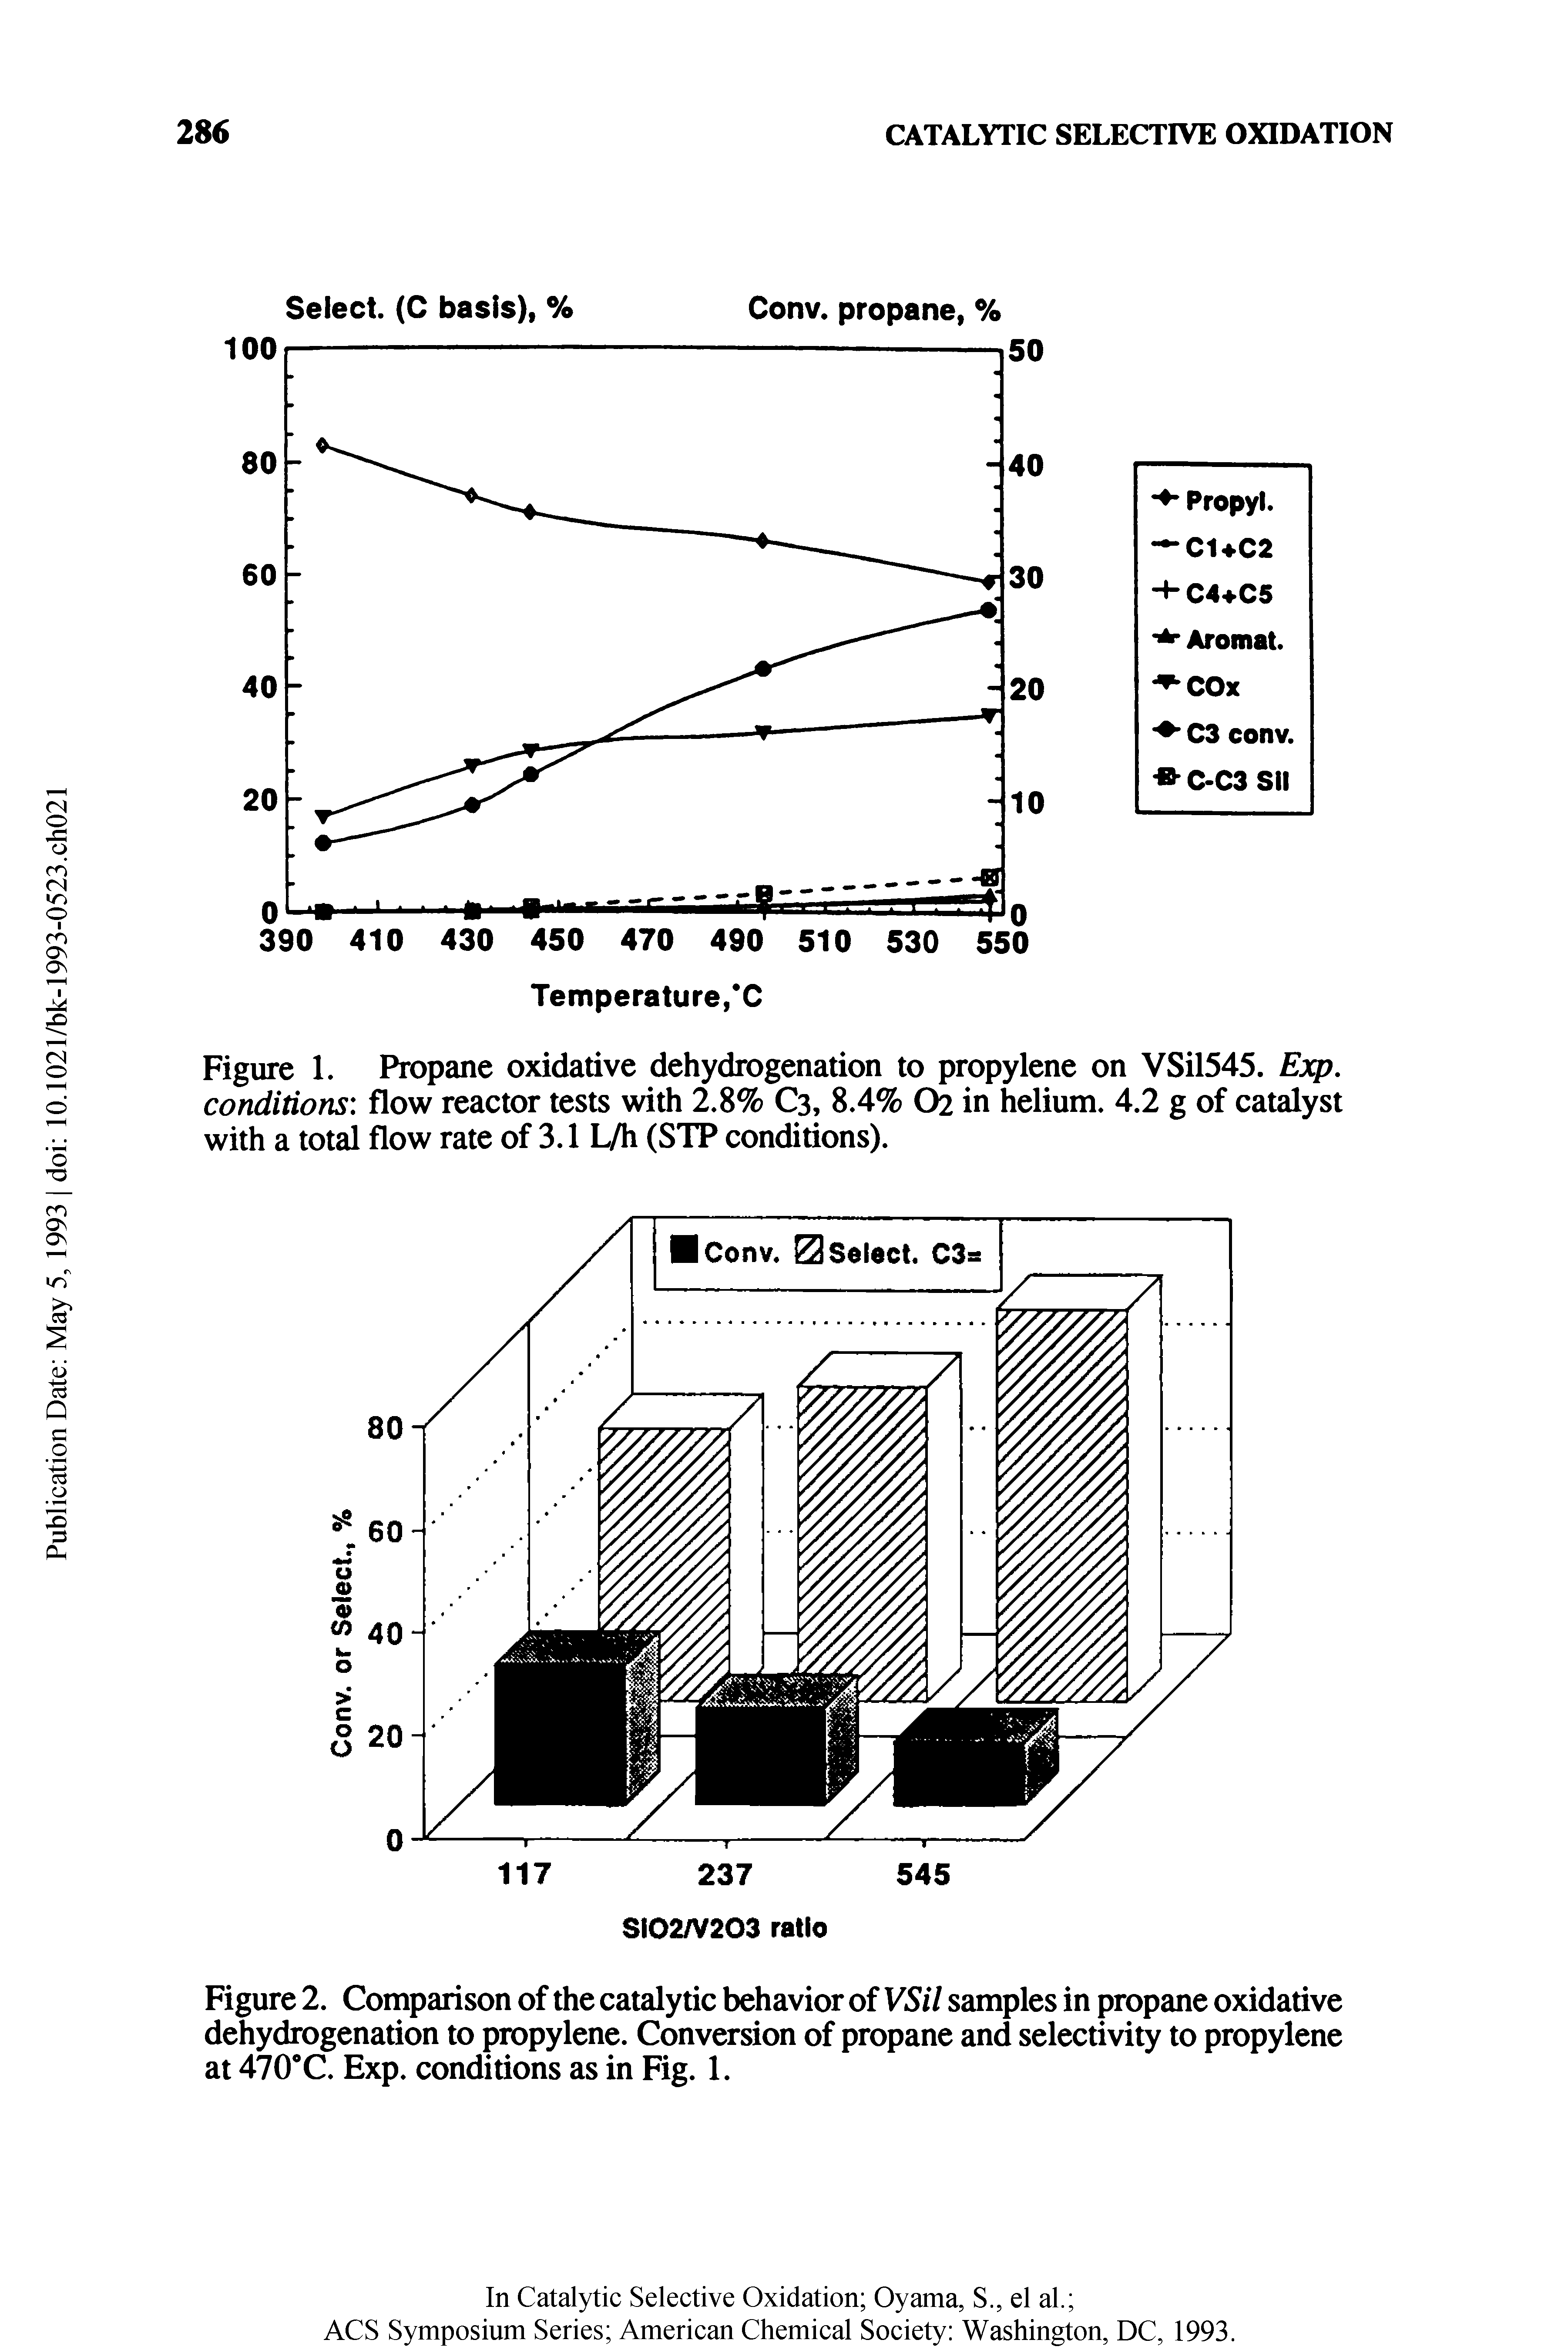 Figure 1. Propane oxidative dehydrogenation to propylene on VSil545. Exp. conditions flow reactor tests with 2.8% C3, 8.4% O2 in helium. 4.2 g of catalyst with a total flow rate of 3.1 L/h (STP conditions).